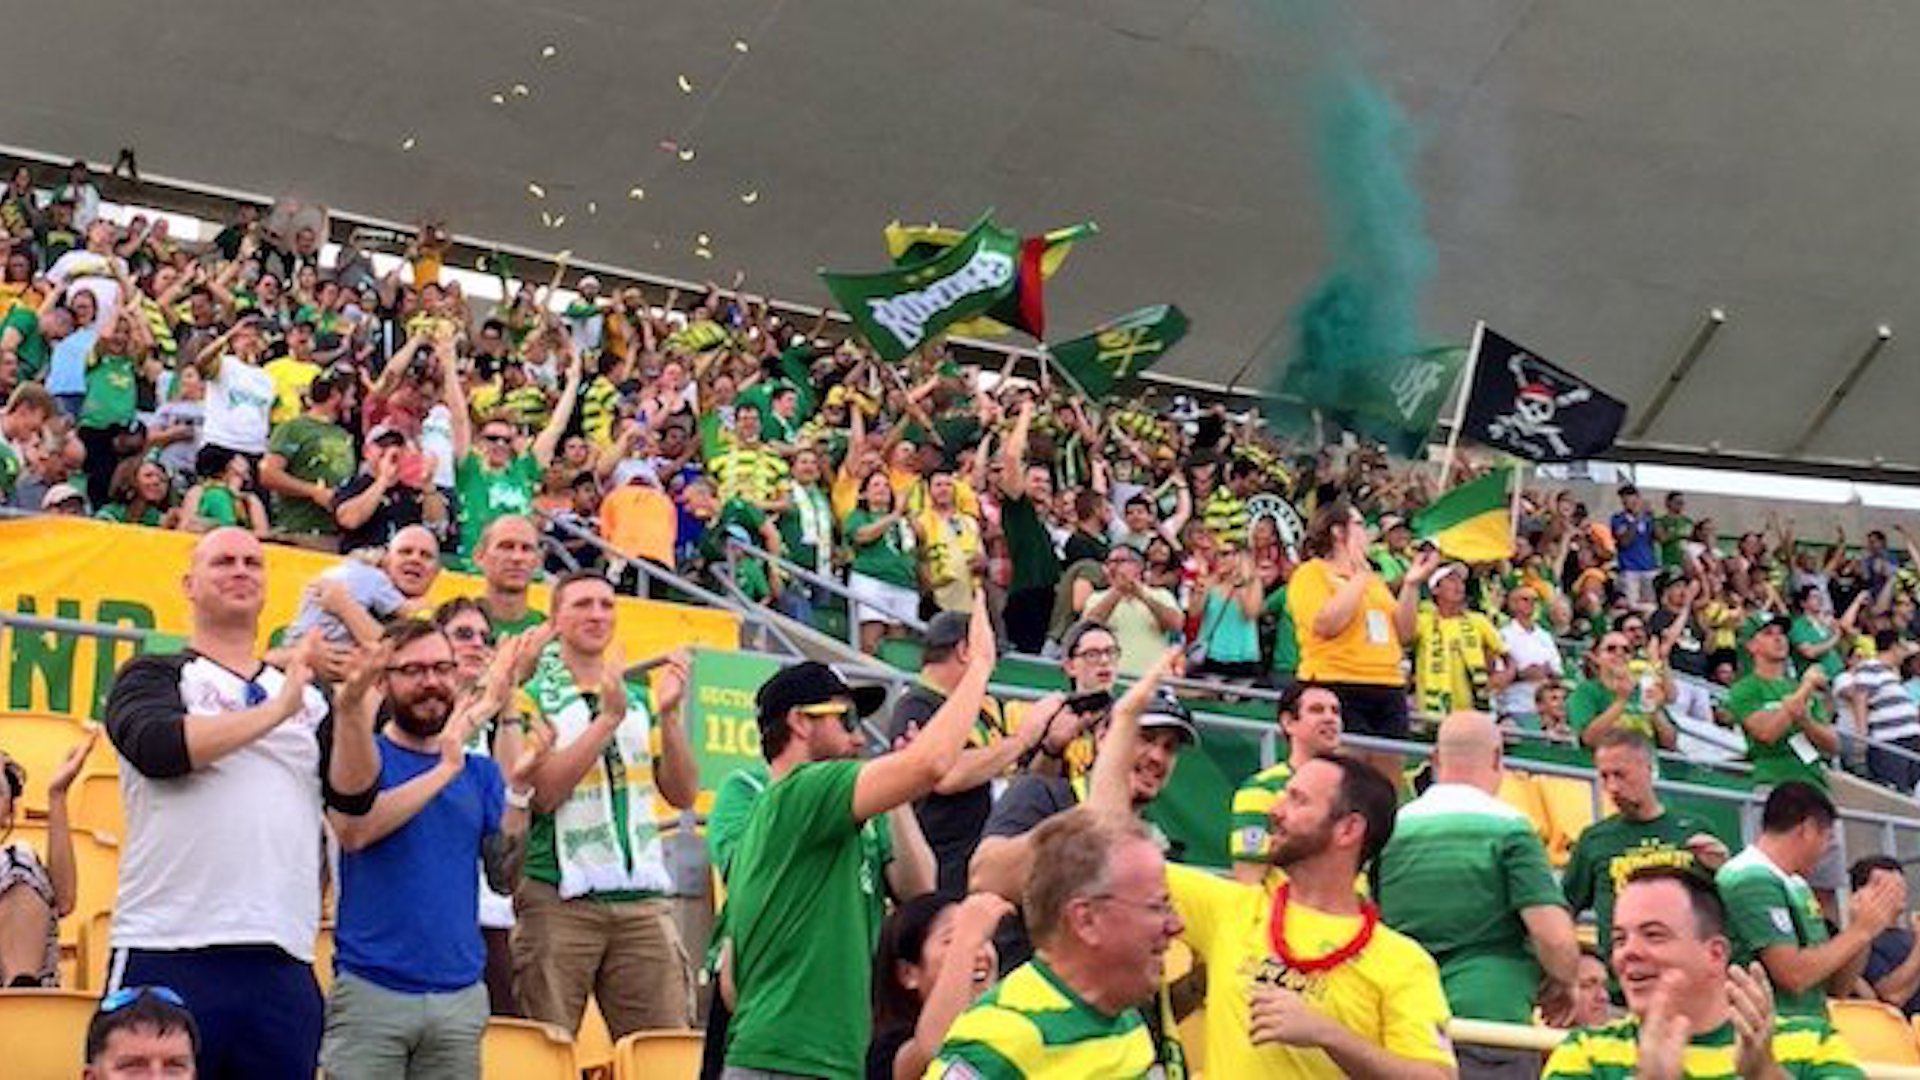 Tampa Bay Rowdies The guide to Gameday at Al Lang Stadium I Love the